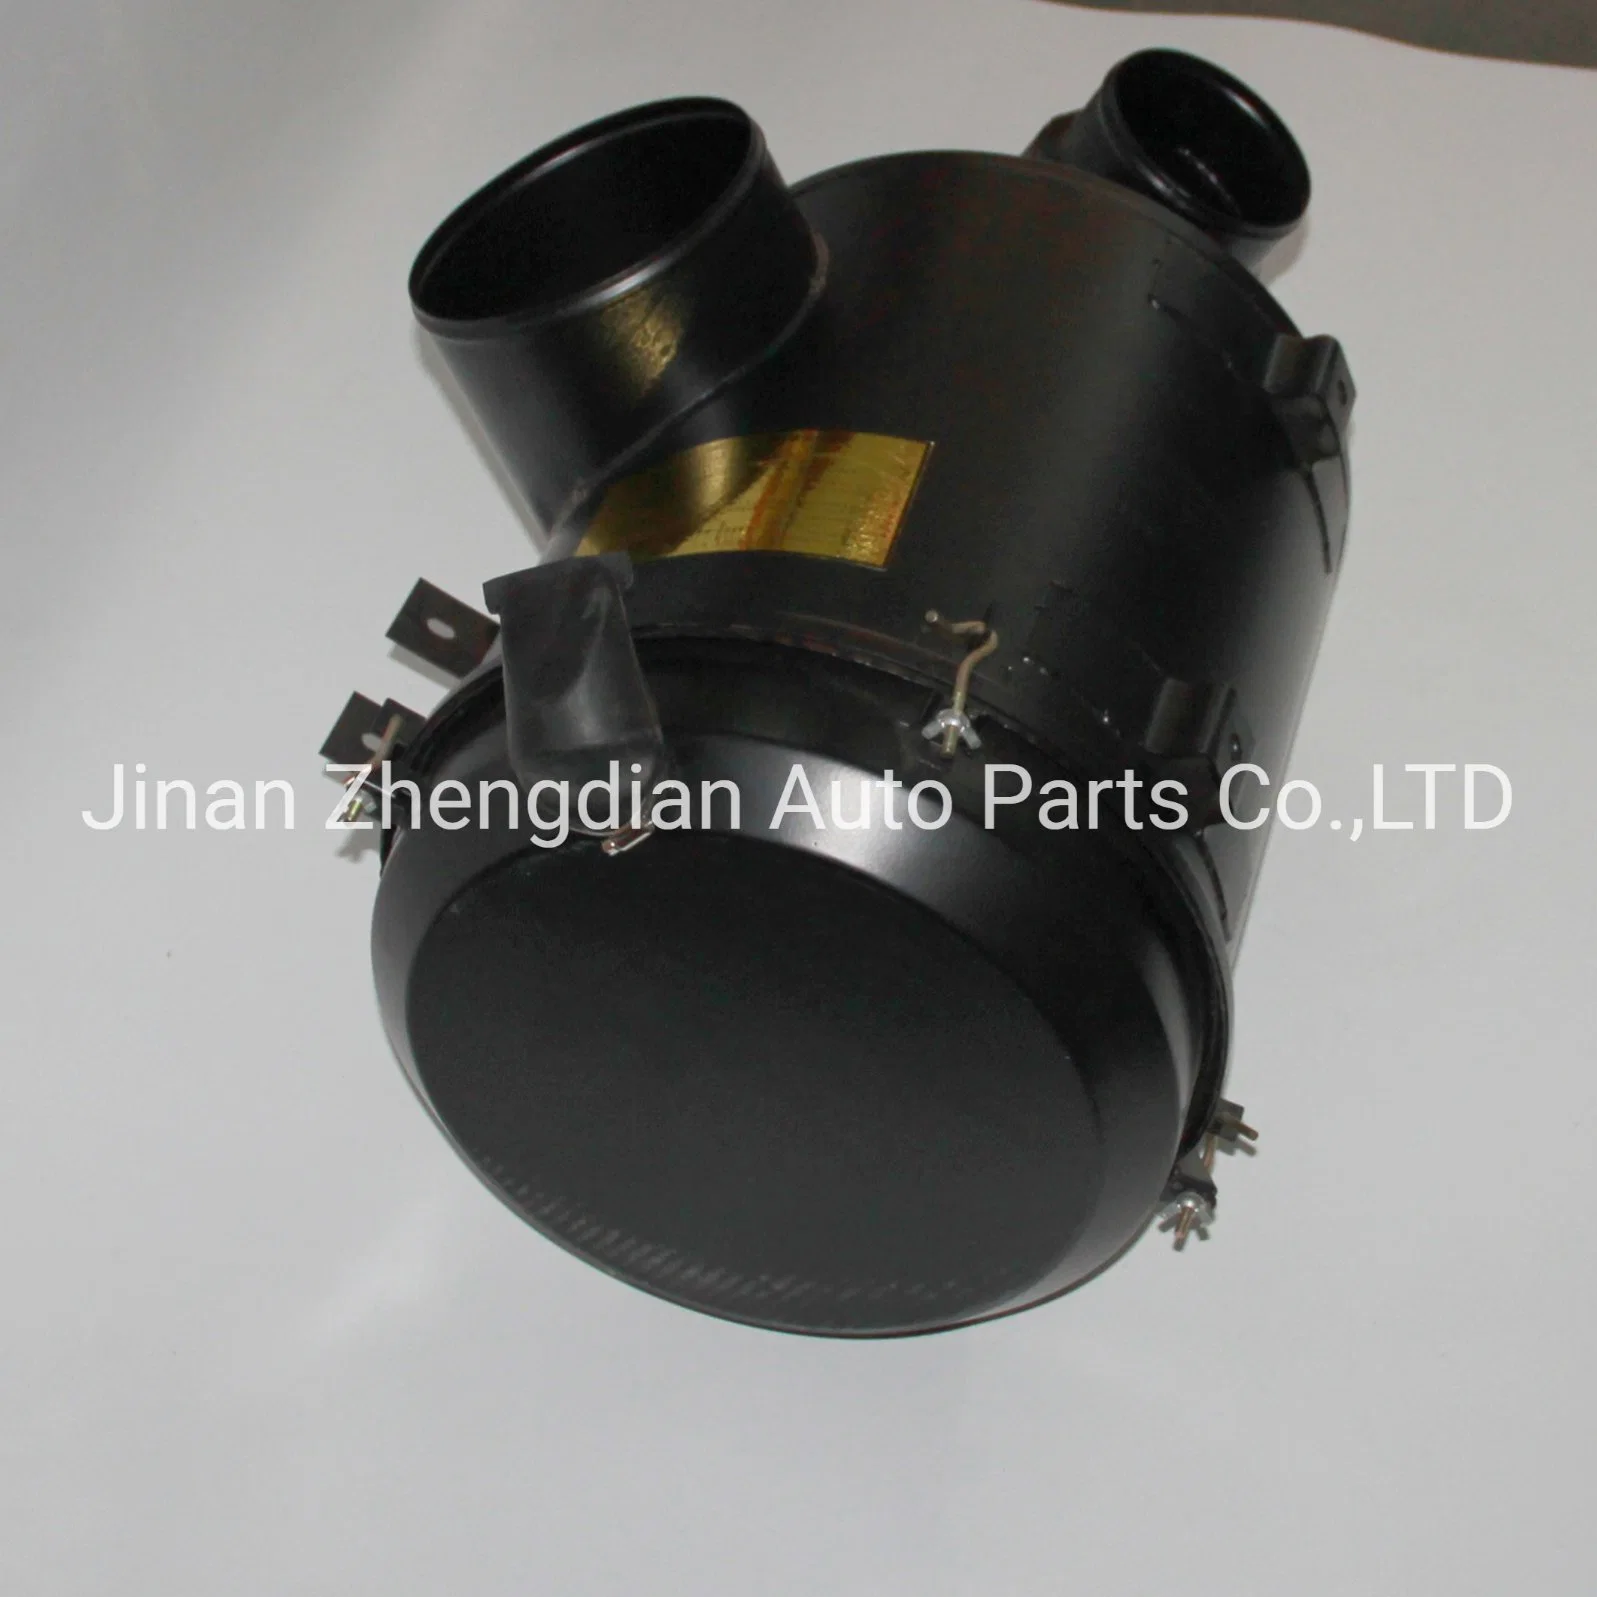 Chinese Truck Air Filter Housing 5060940602 2760940102 for Beiben North Benz Ng80A Ng80b V3 V3m V3et V3mt HOWO Shacman FAW Camc Dongfeng Foton Truck Parts